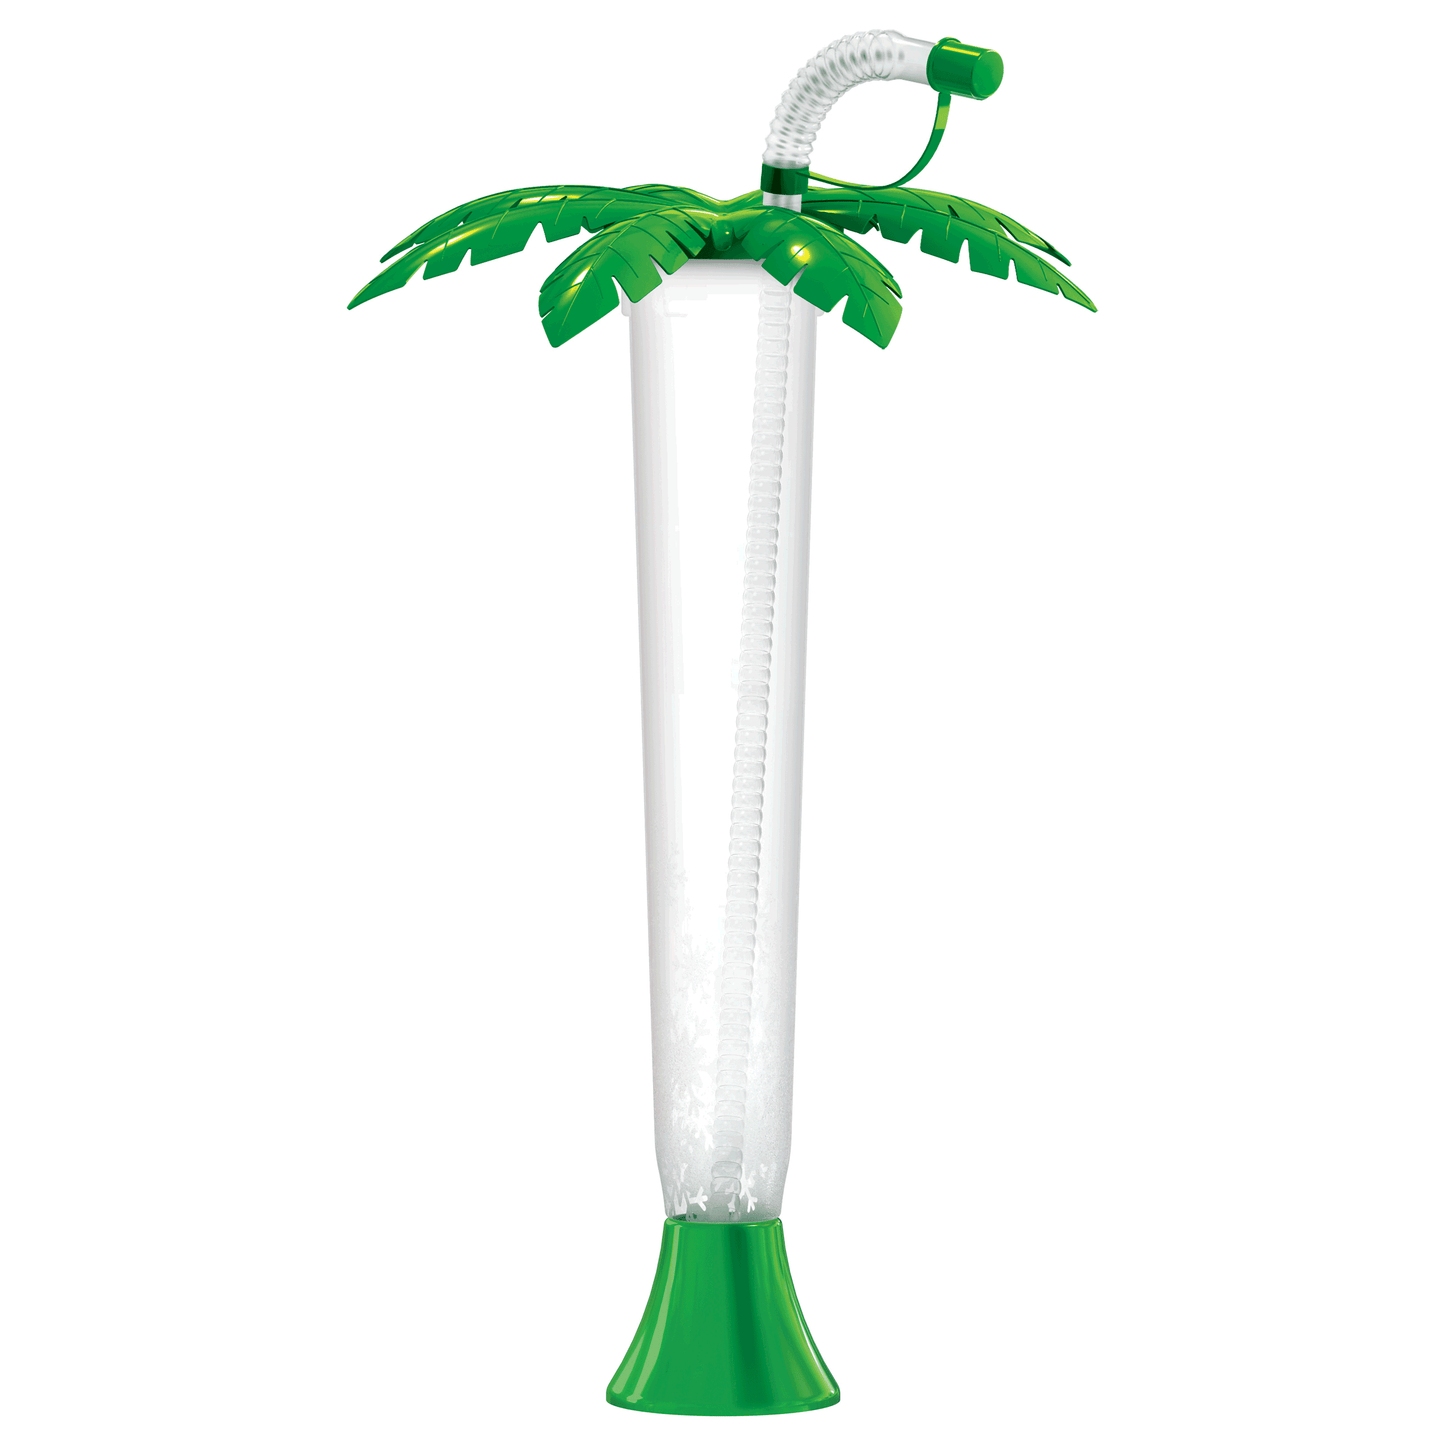 Sweet World USA Yard Cups Palm Cup Palm Tree Luau Yard Cups (108 cups) - for Margaritas, Cold Drinks, Frozen Drinks, Kids Parties - 14 oz. (400 ml) - Green cups with lids and straws